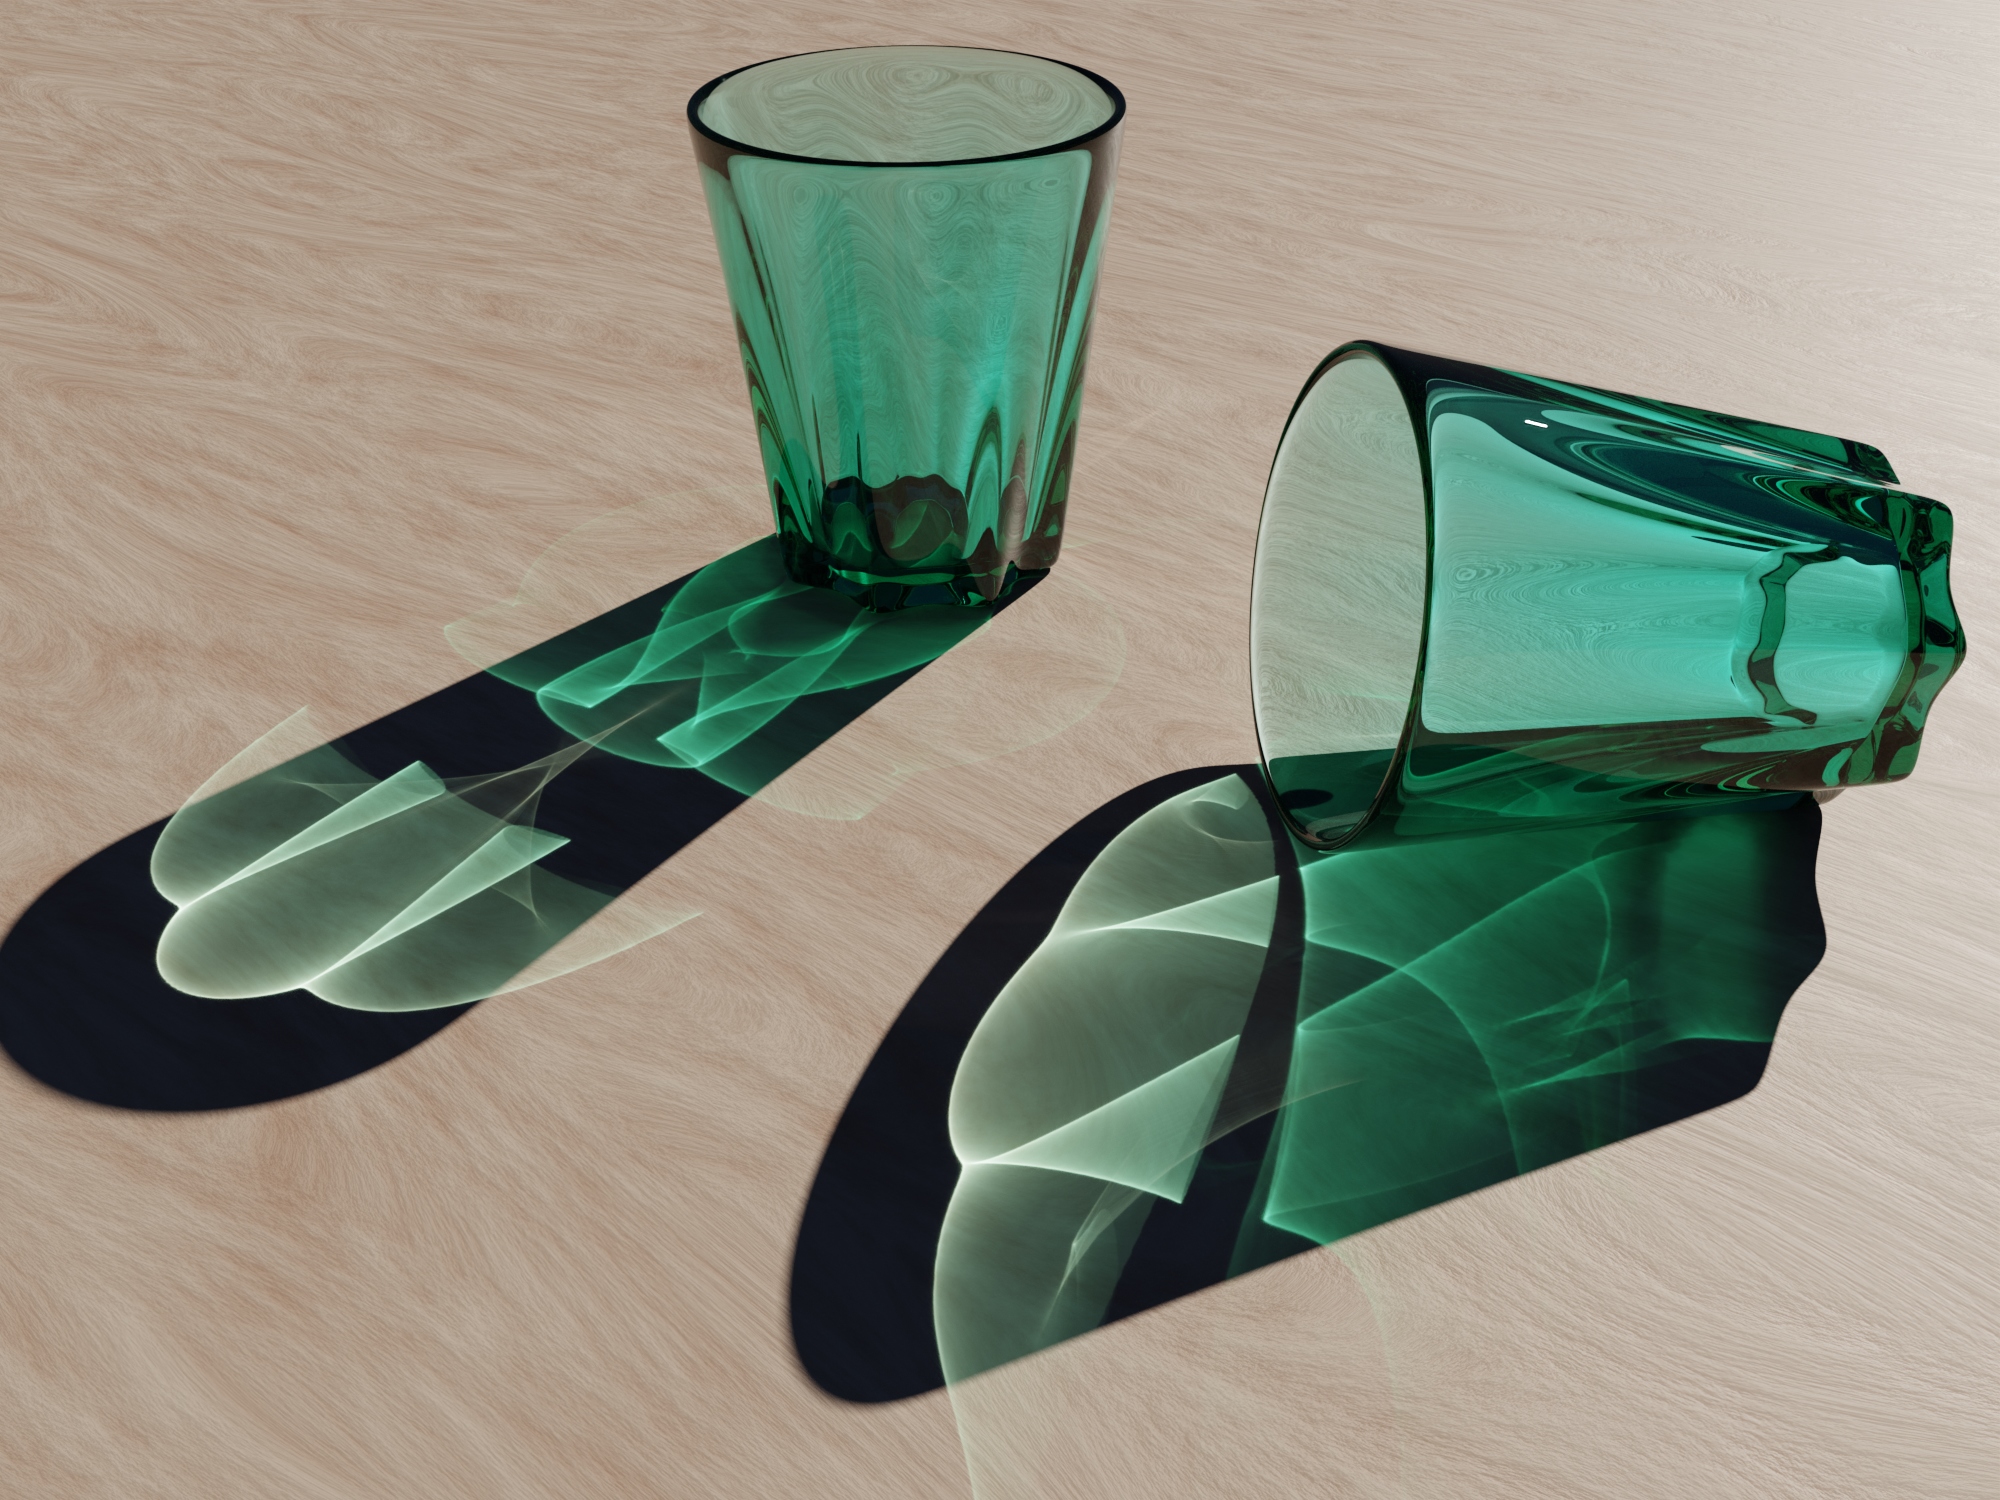 Drinking glasses on table with caustics